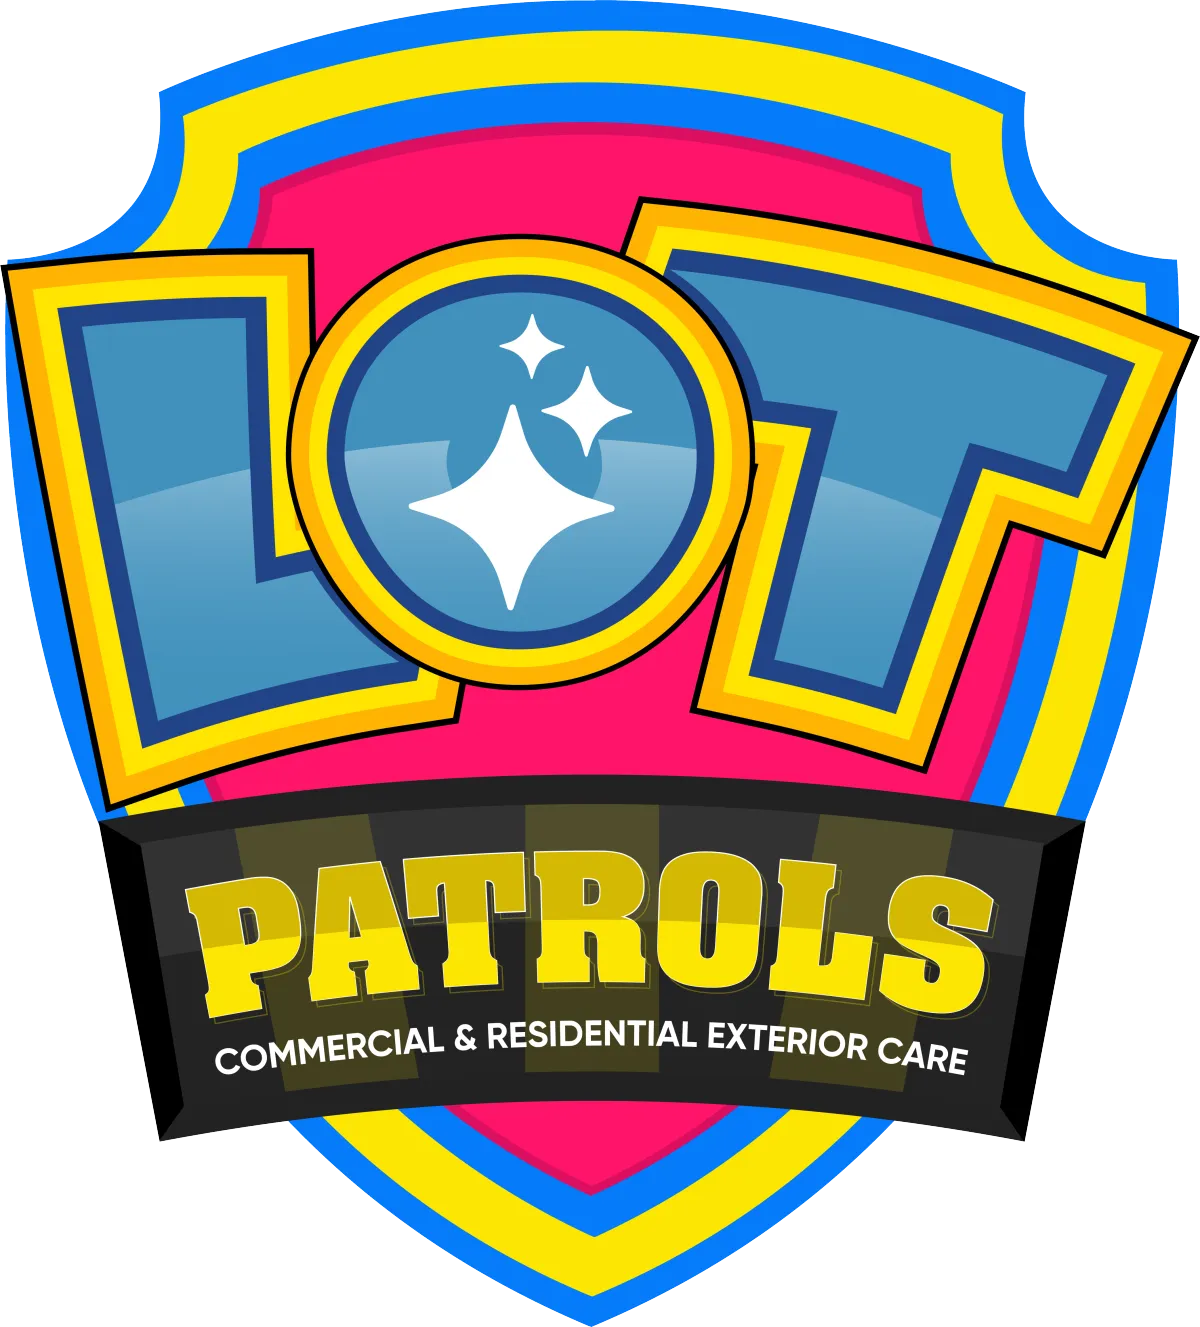 Lot Patrols Commercial & Residential Exterior Care